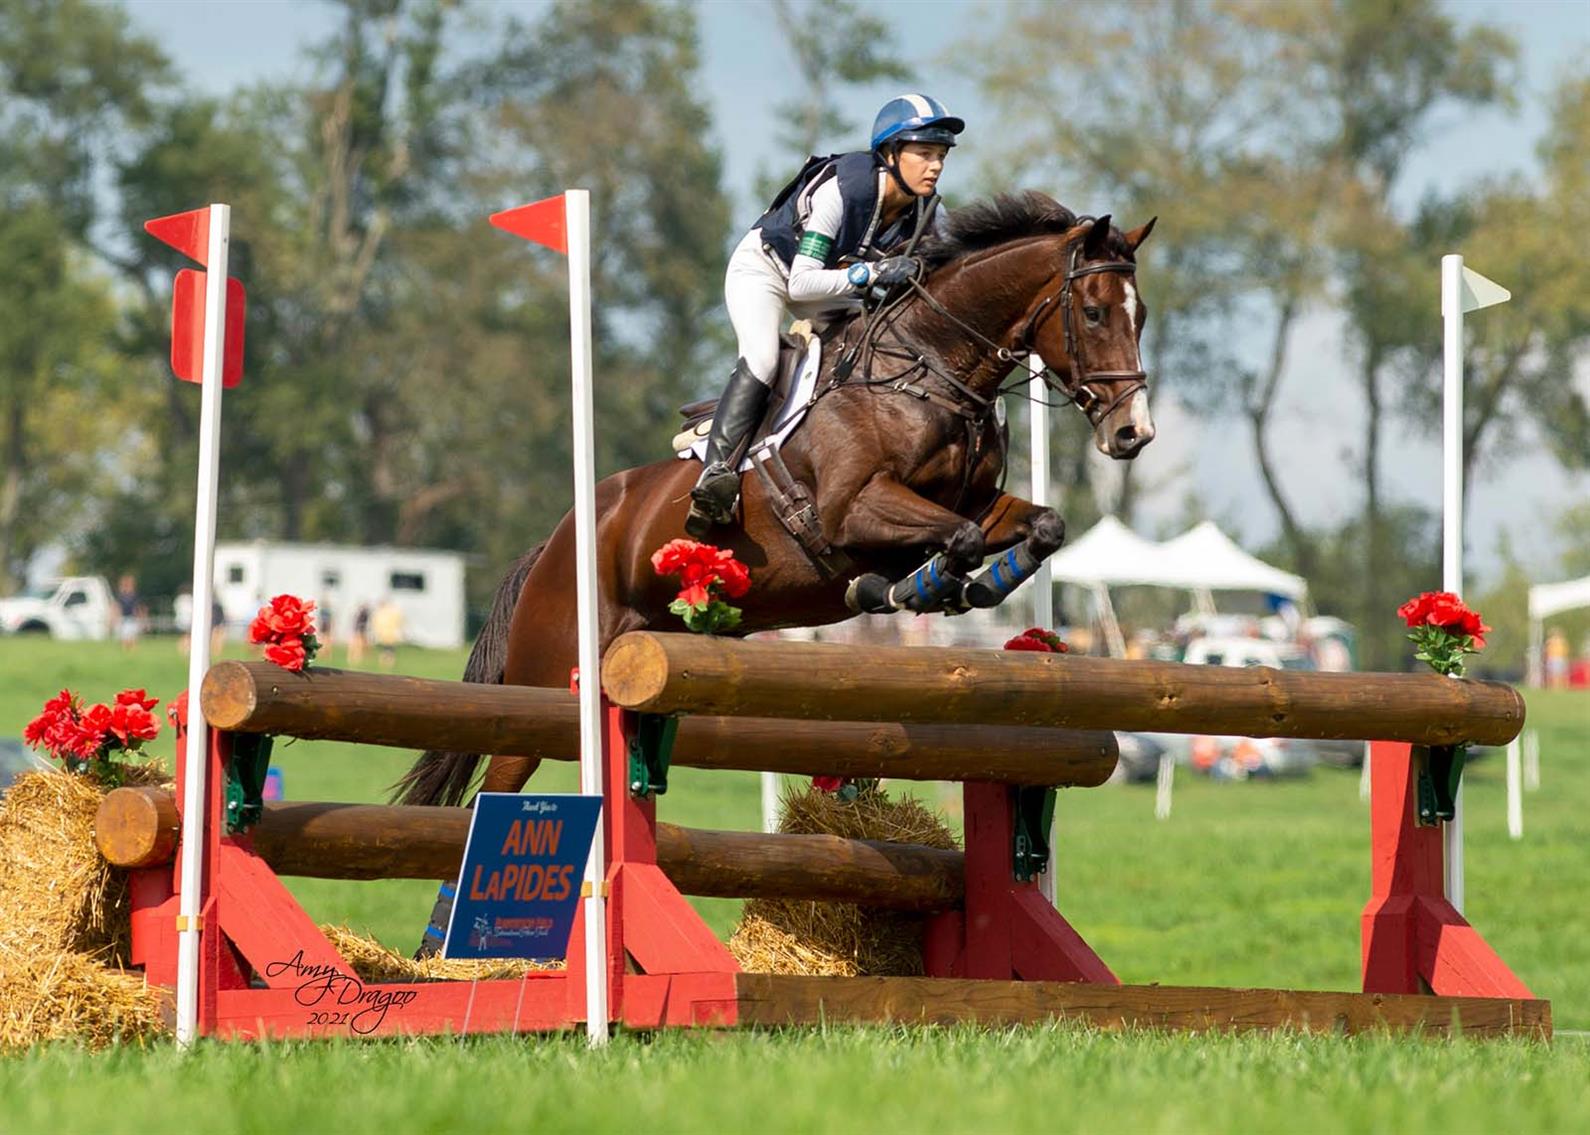 Mia Farley and Phelps clearing a cross-country oxer at the YTC Unionville